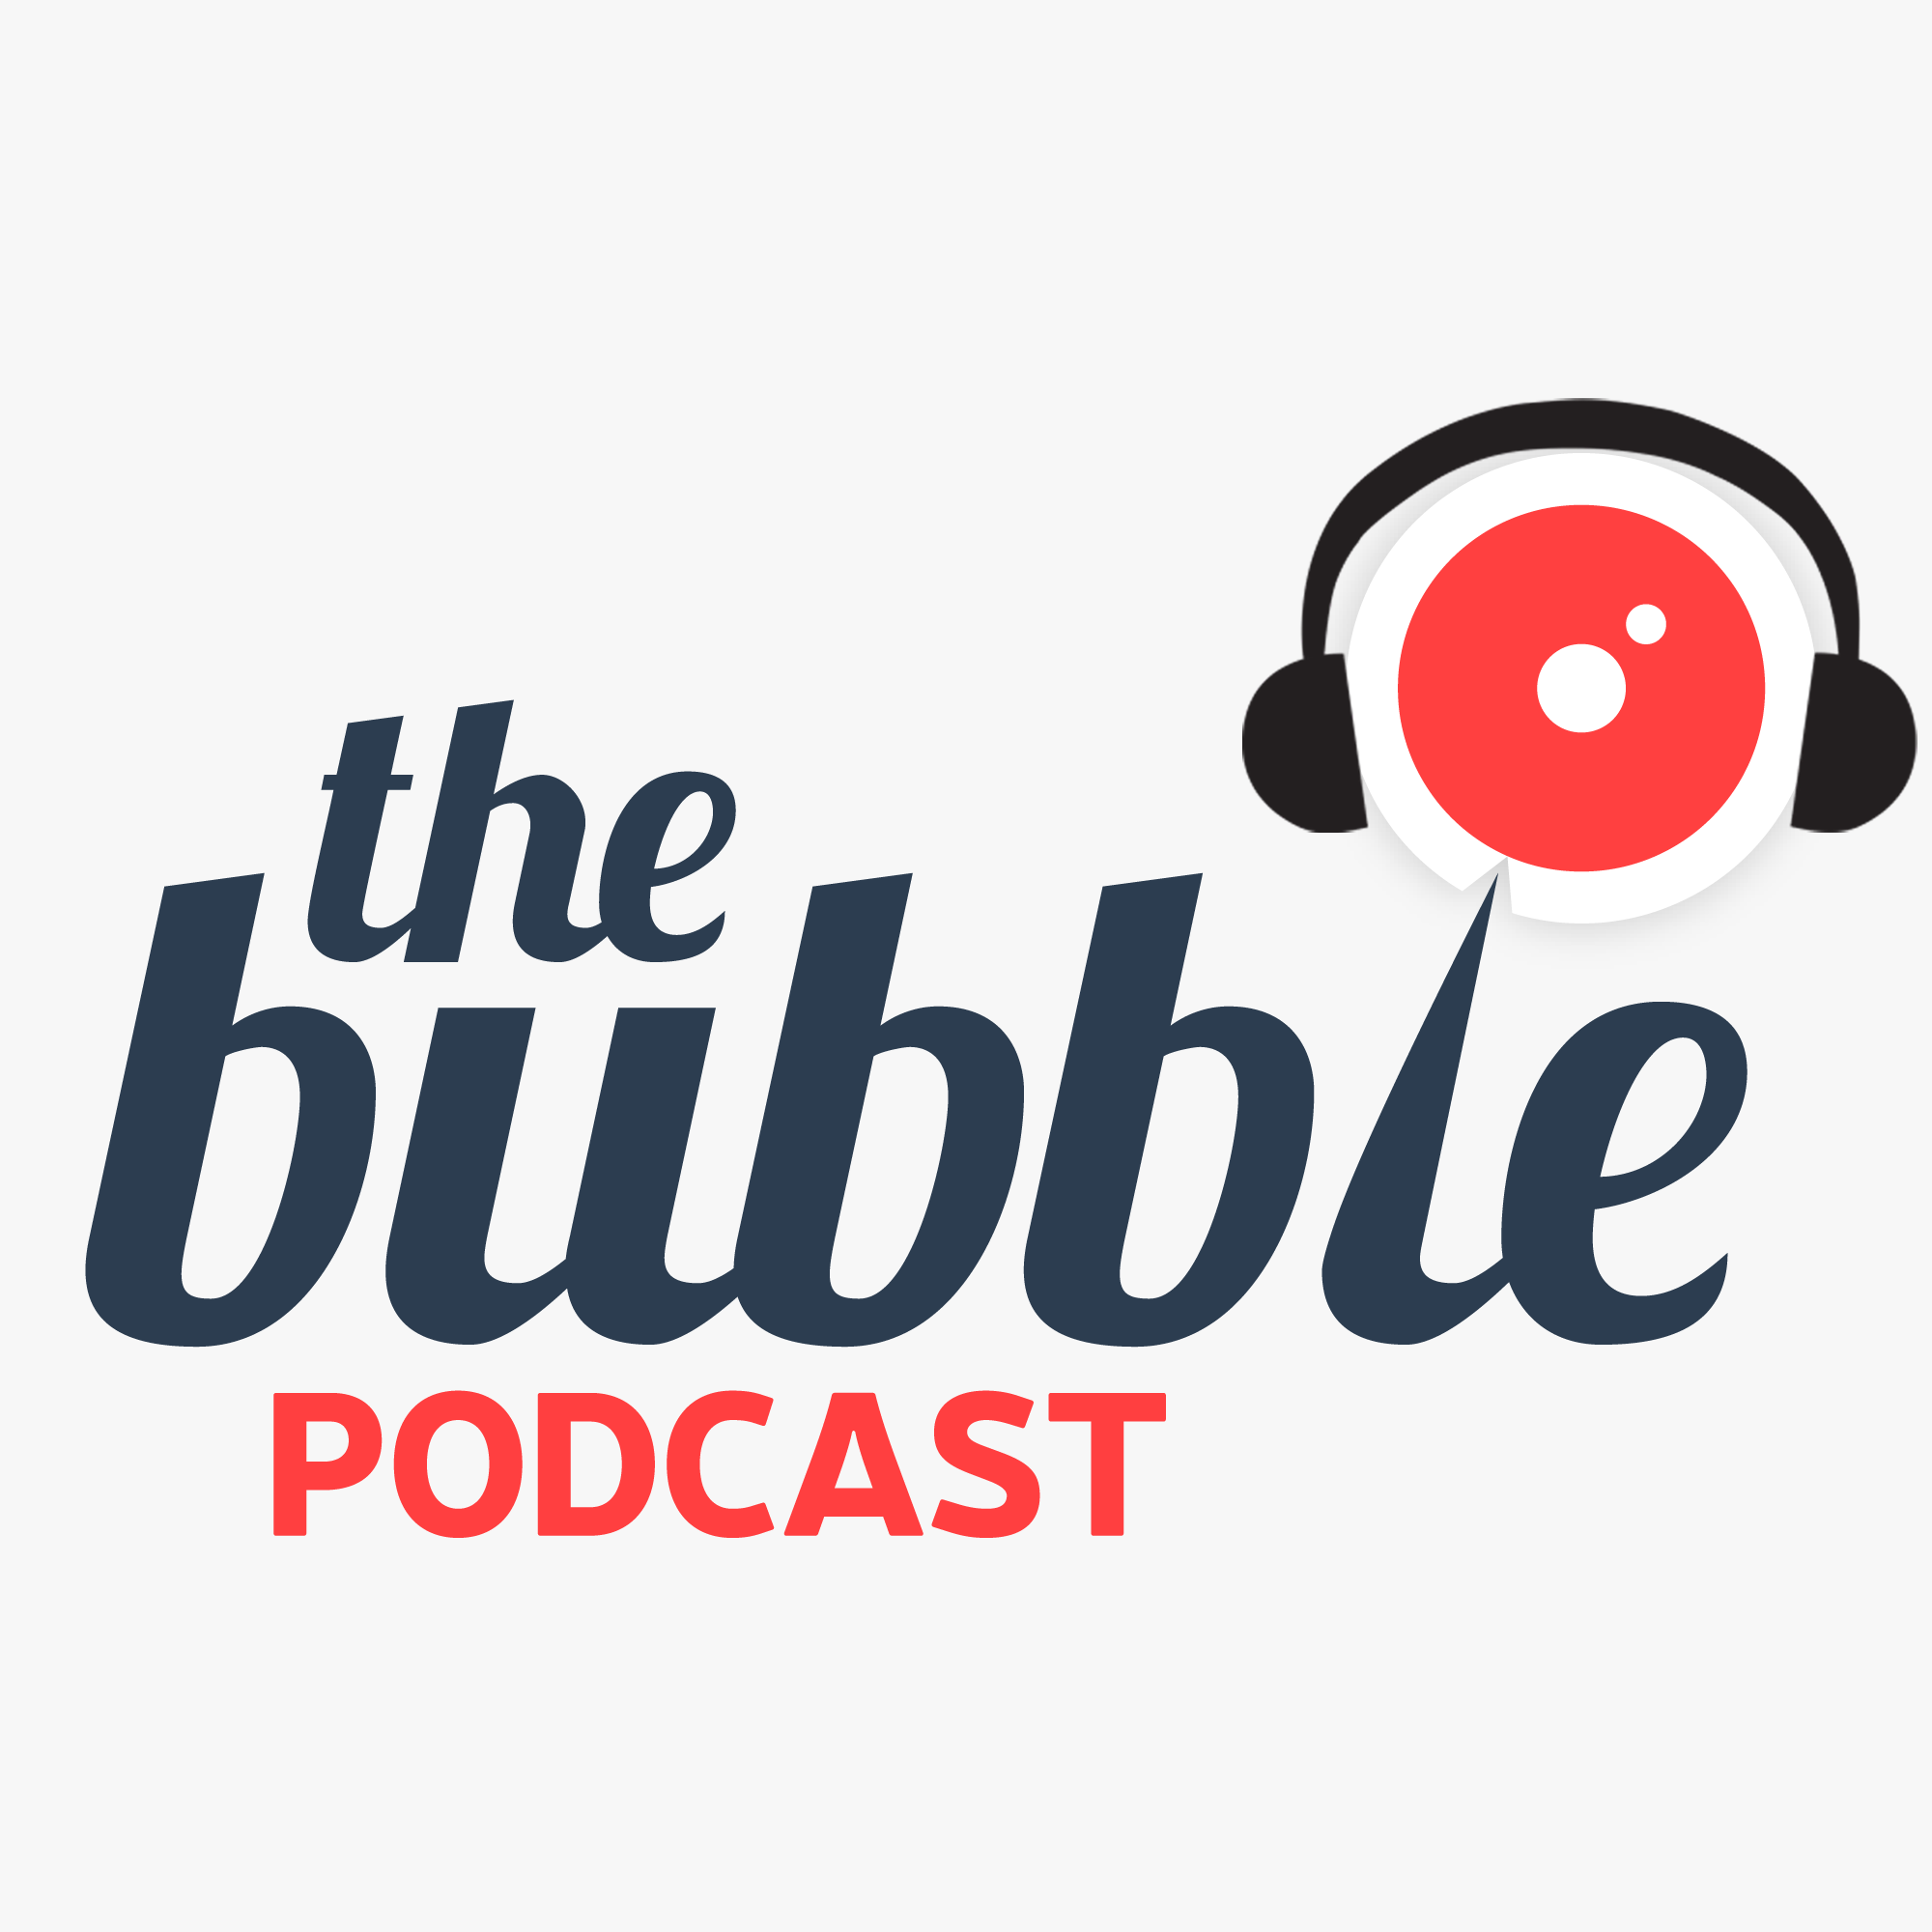 #Podcast The Bubble 24.07: The "Polaquito" scandal, Culture and Tourism in BA and more!